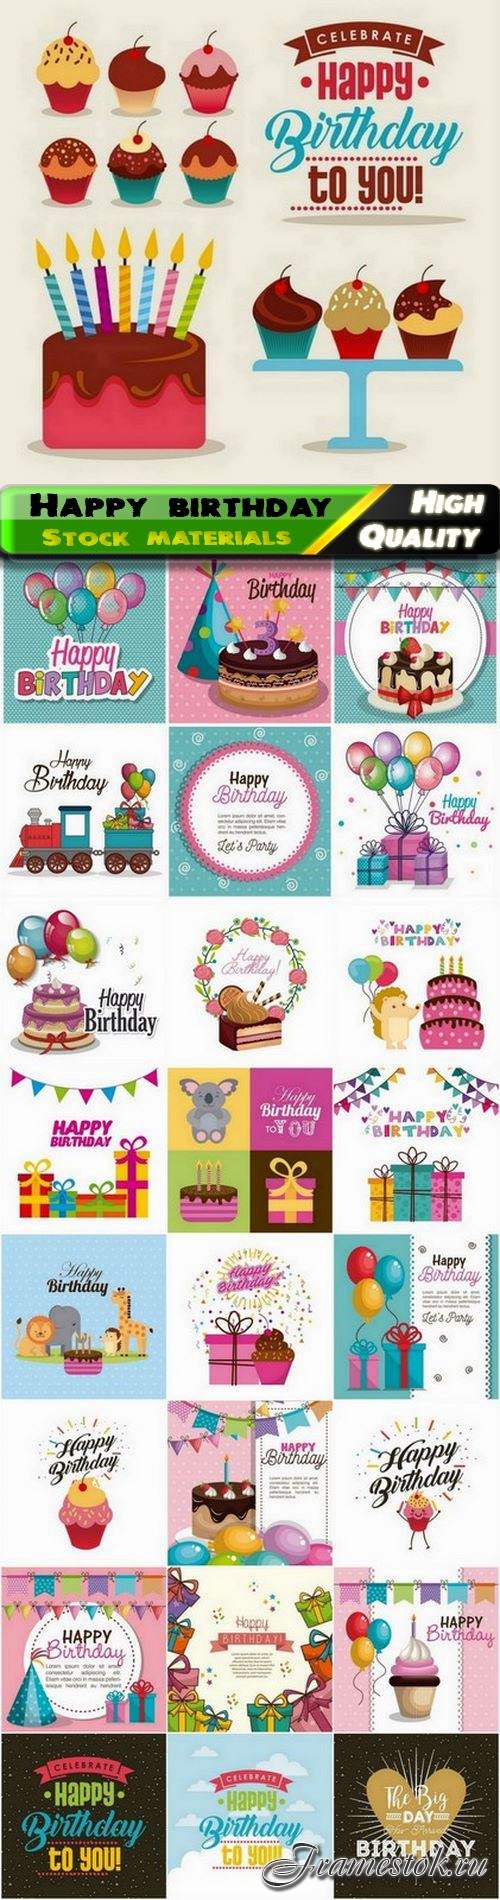 Happy birthday card with holiday cake gift box confetti balloons 25 Eps